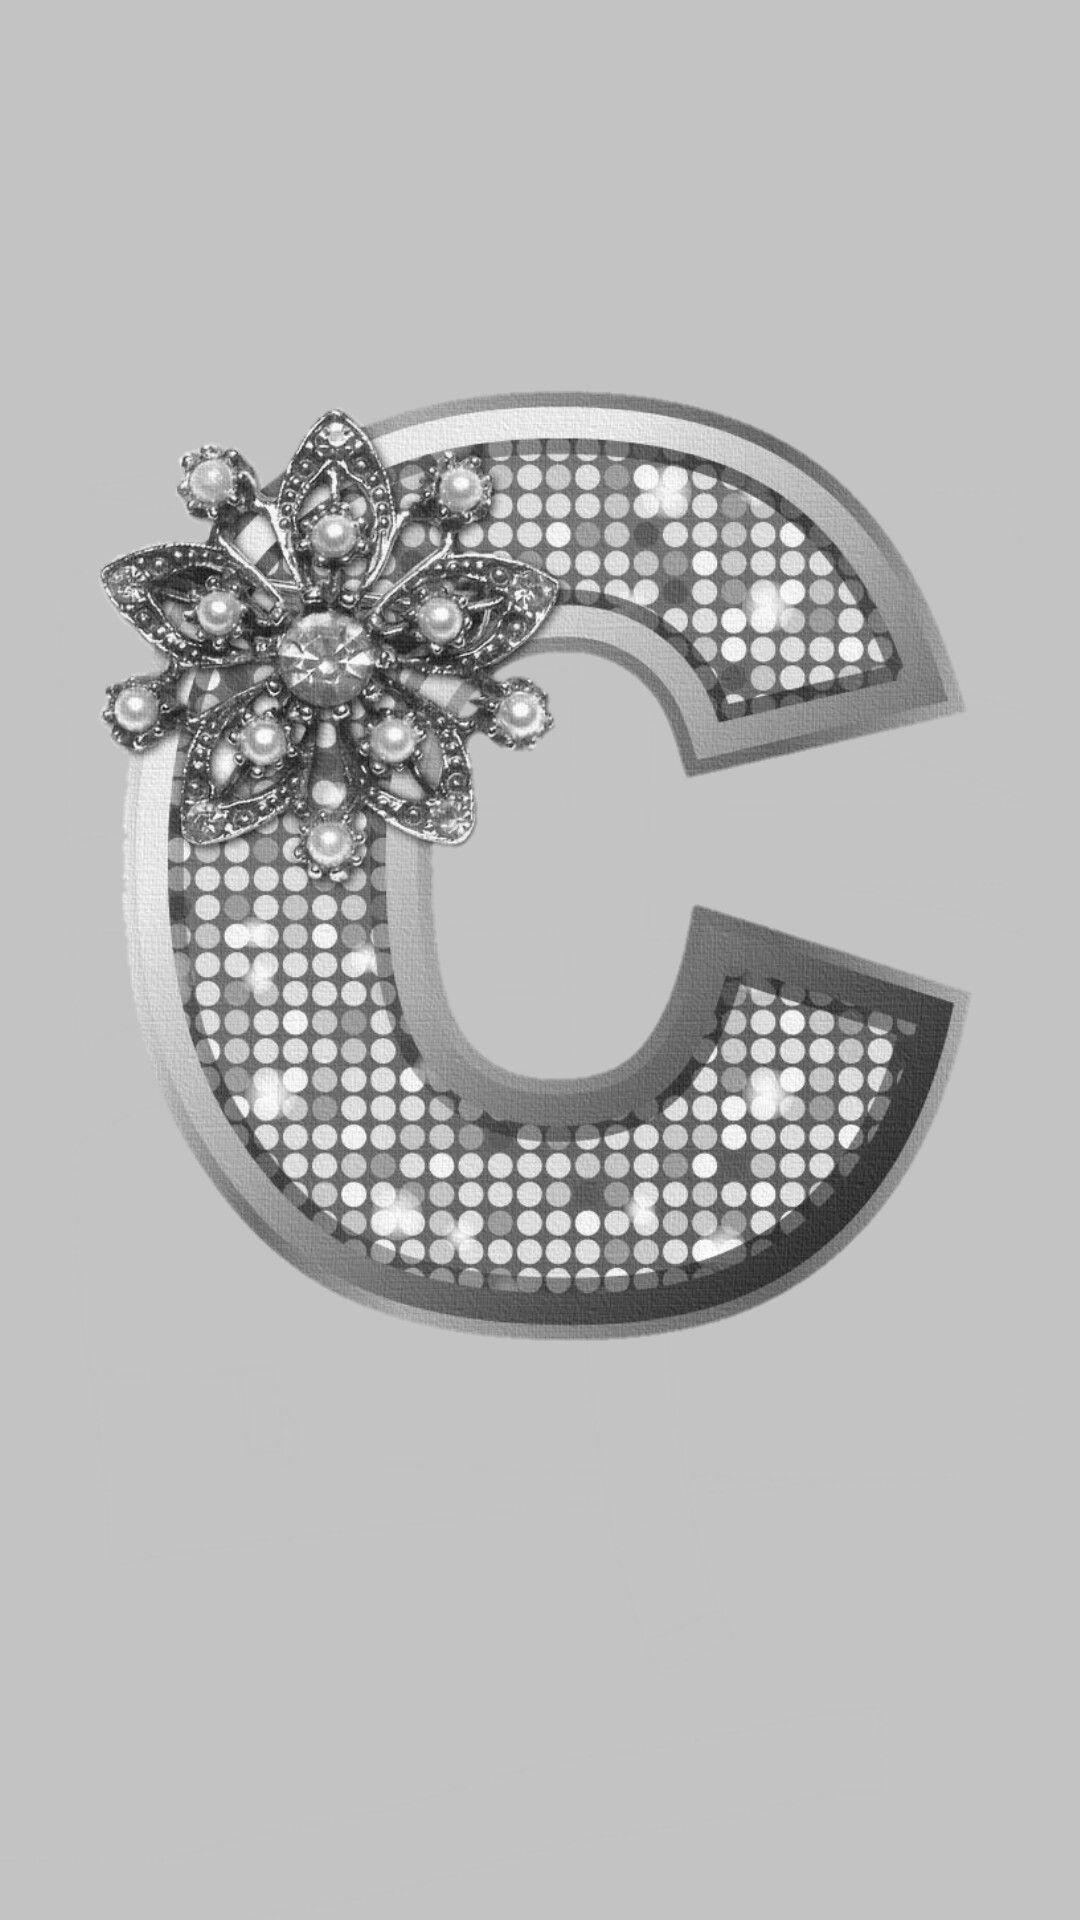 c-letter-wallpapers-wallpaper-cave